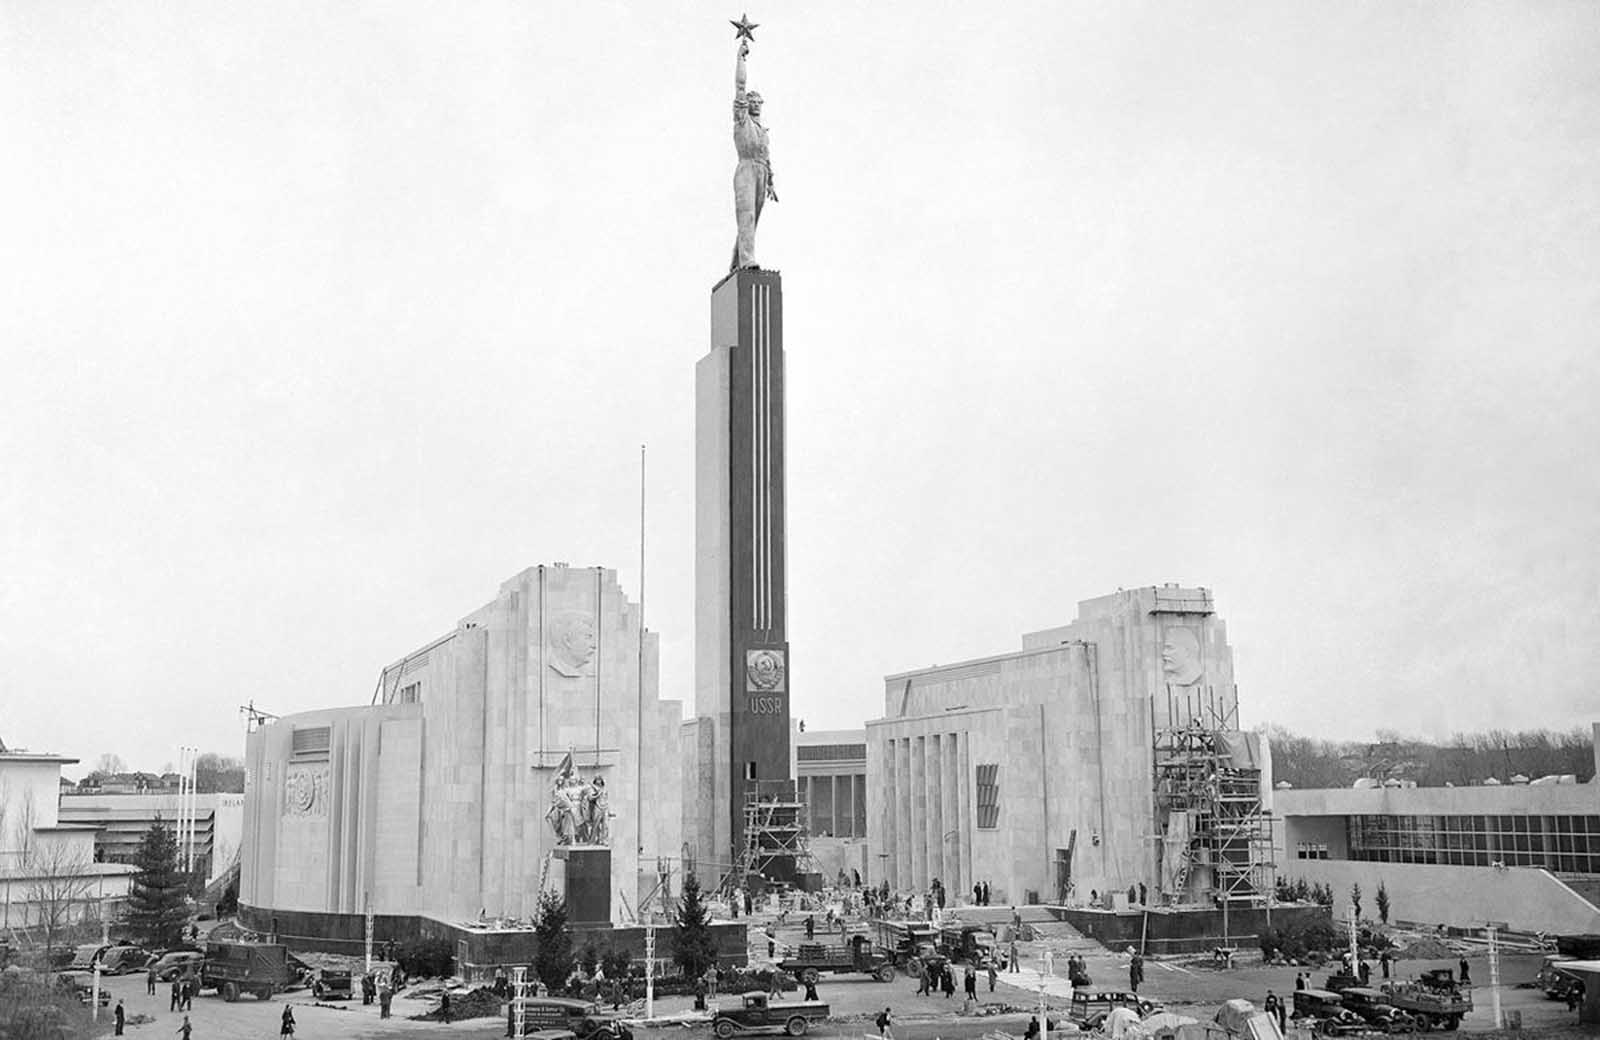 The Soviet pavilion at the New York World's fair, one of the last exhibits to be completed for opening of the exposition on April 30, 1939. A theater and a restaurant are incorporated in the semi-circular structure, and the exhibits and activities are designed to show the Russia's peoples.